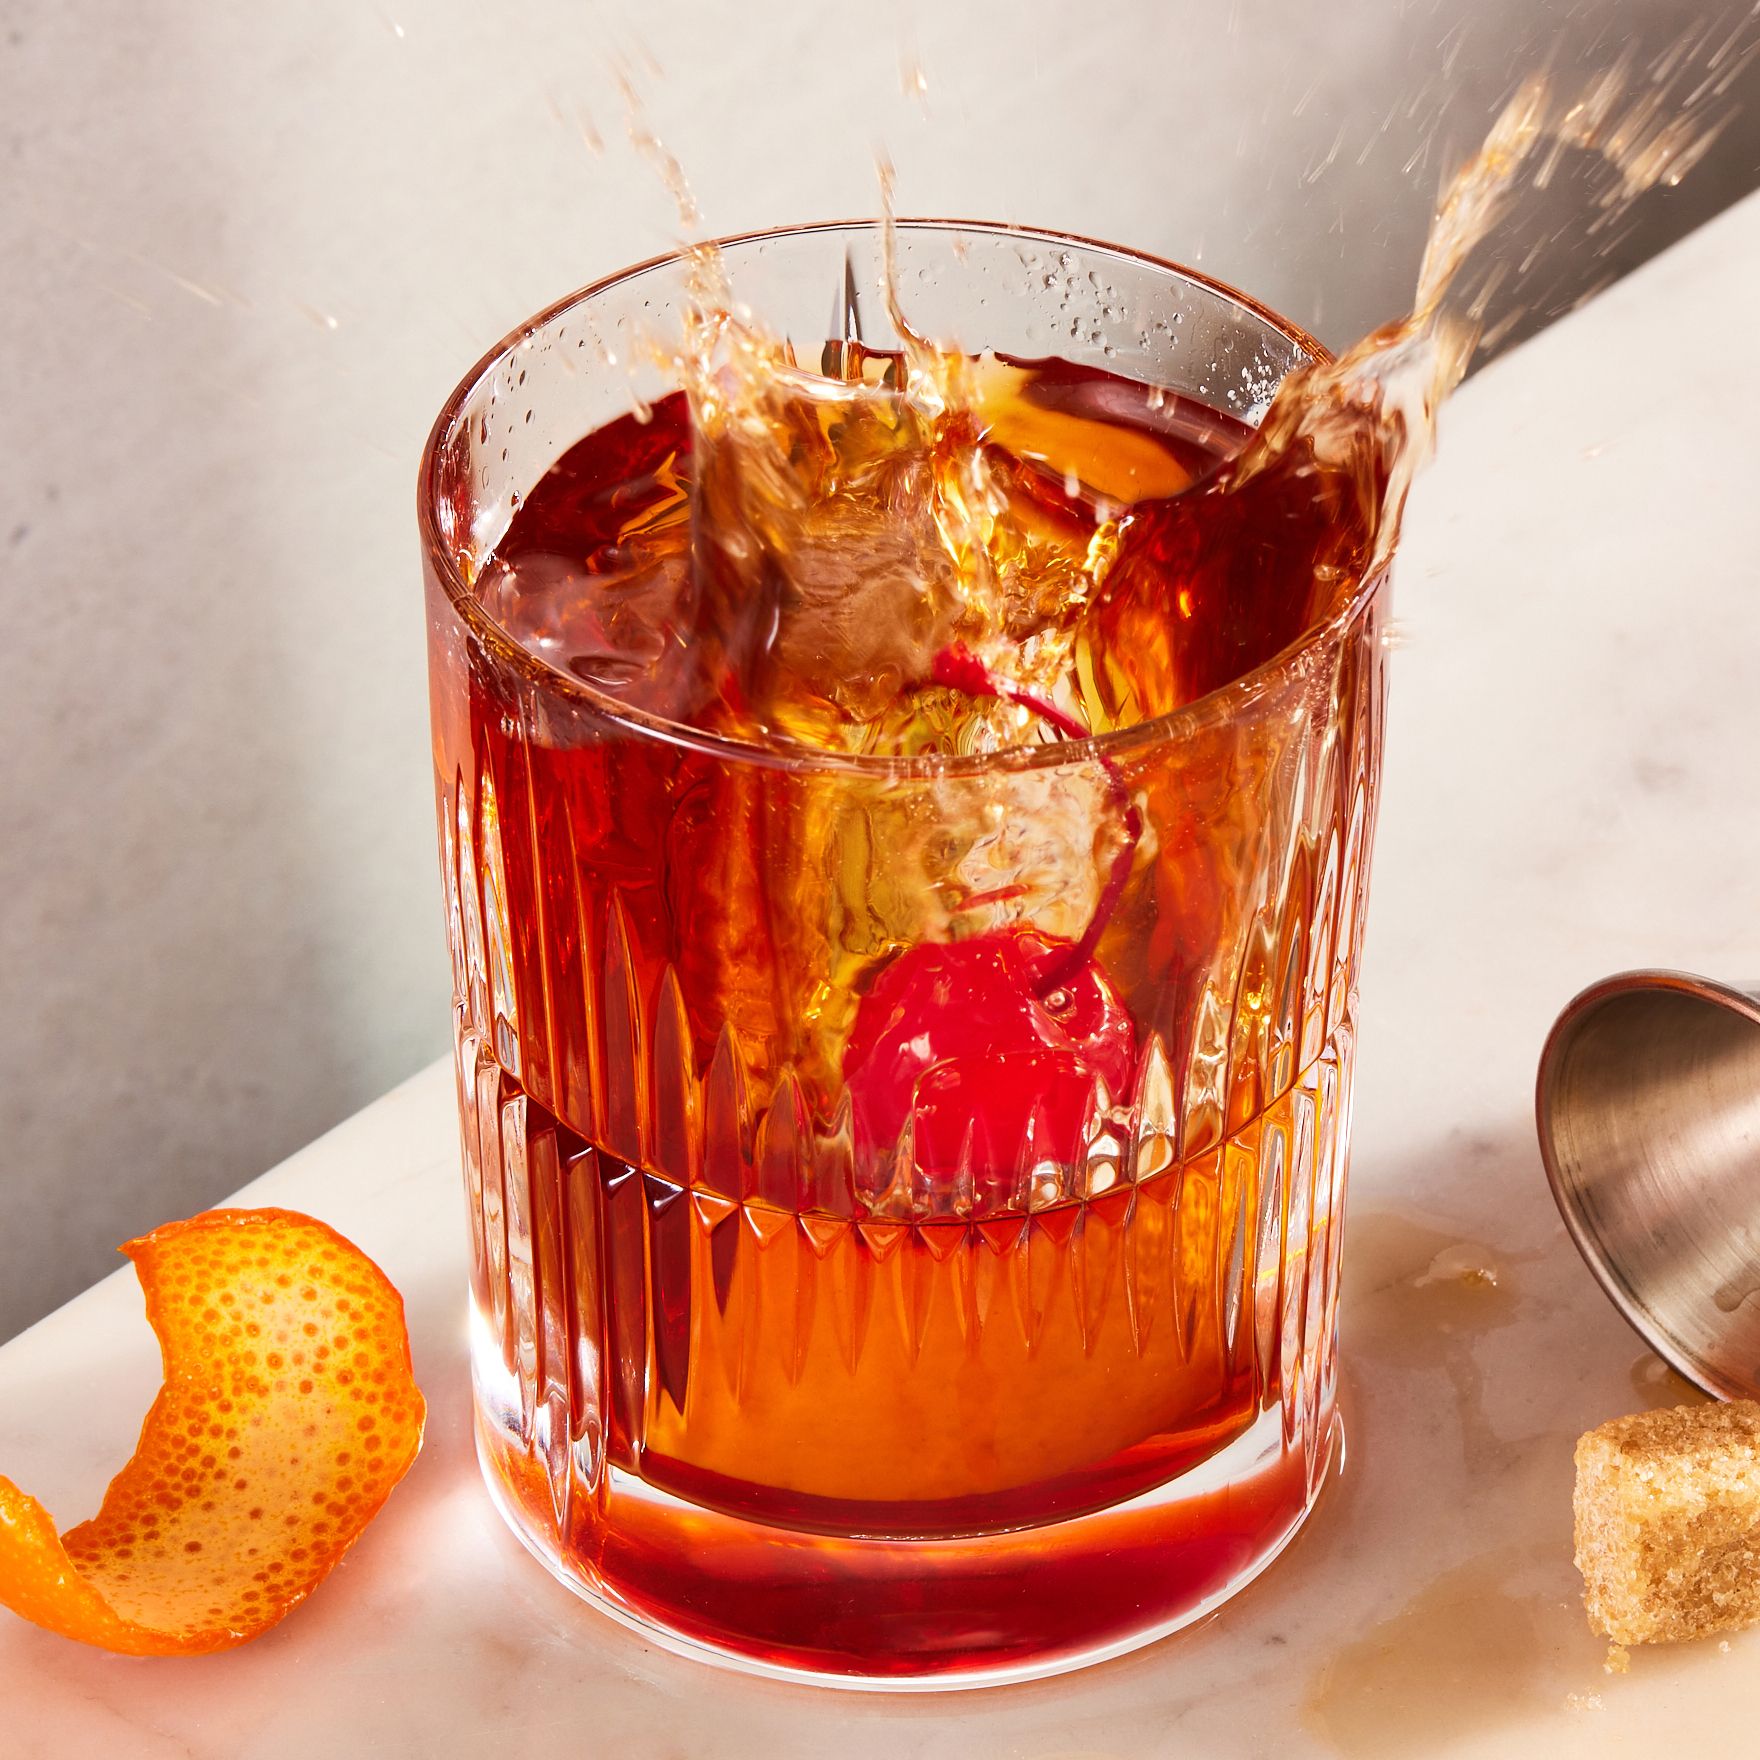 Best Old Fashioned Cocktail Recipe - How To Make A Classic Old Fashioned